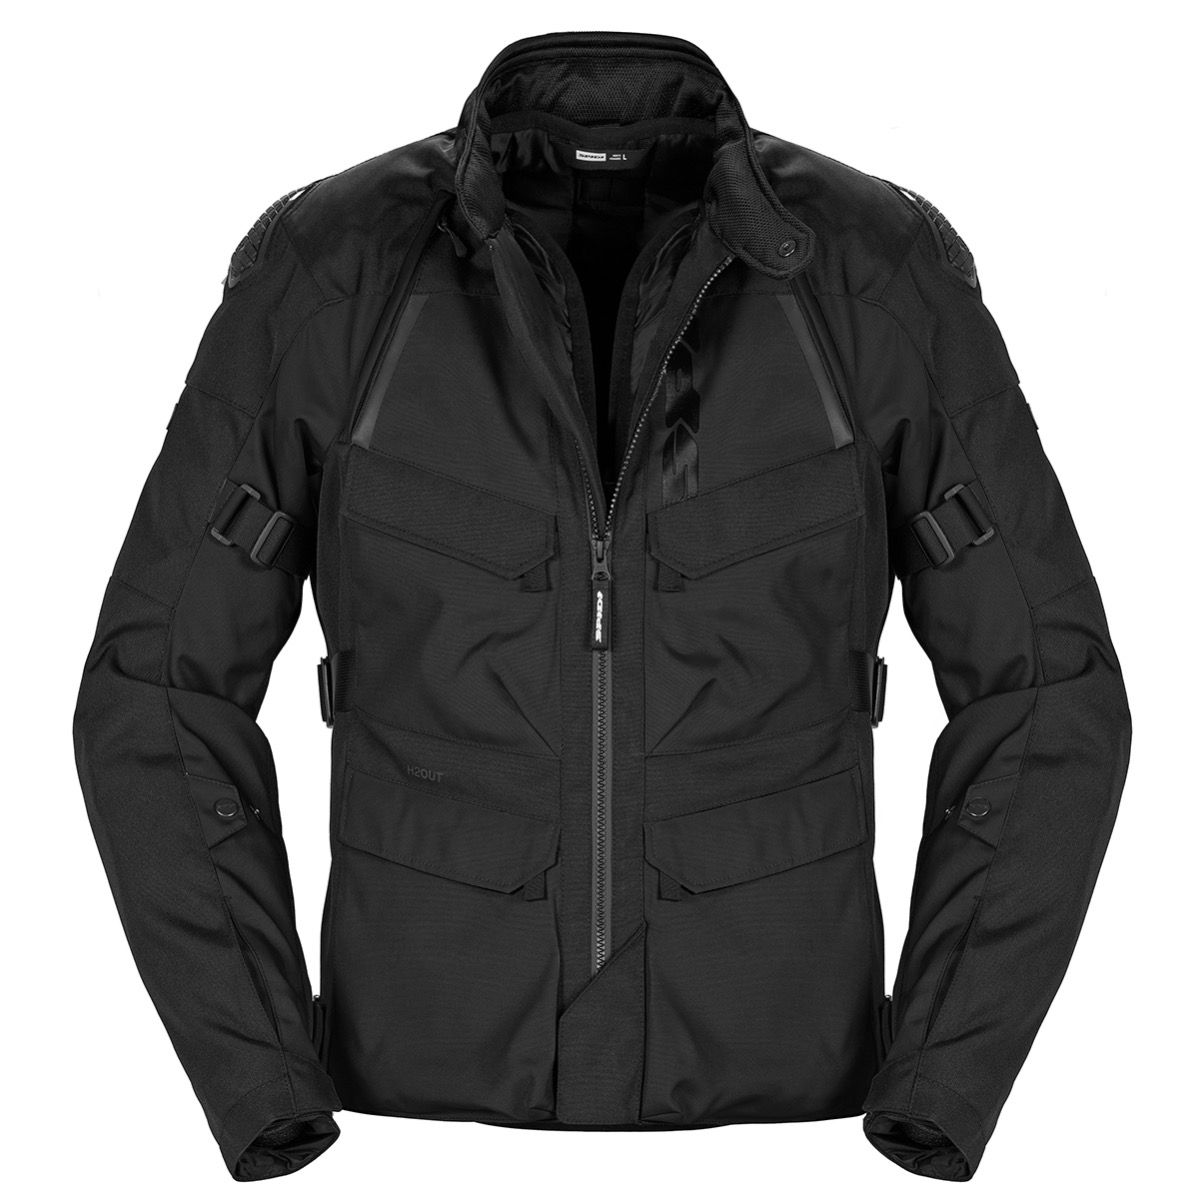 Image of Spidi Rw H2Out Jacket Black Size L ID 8030161475814